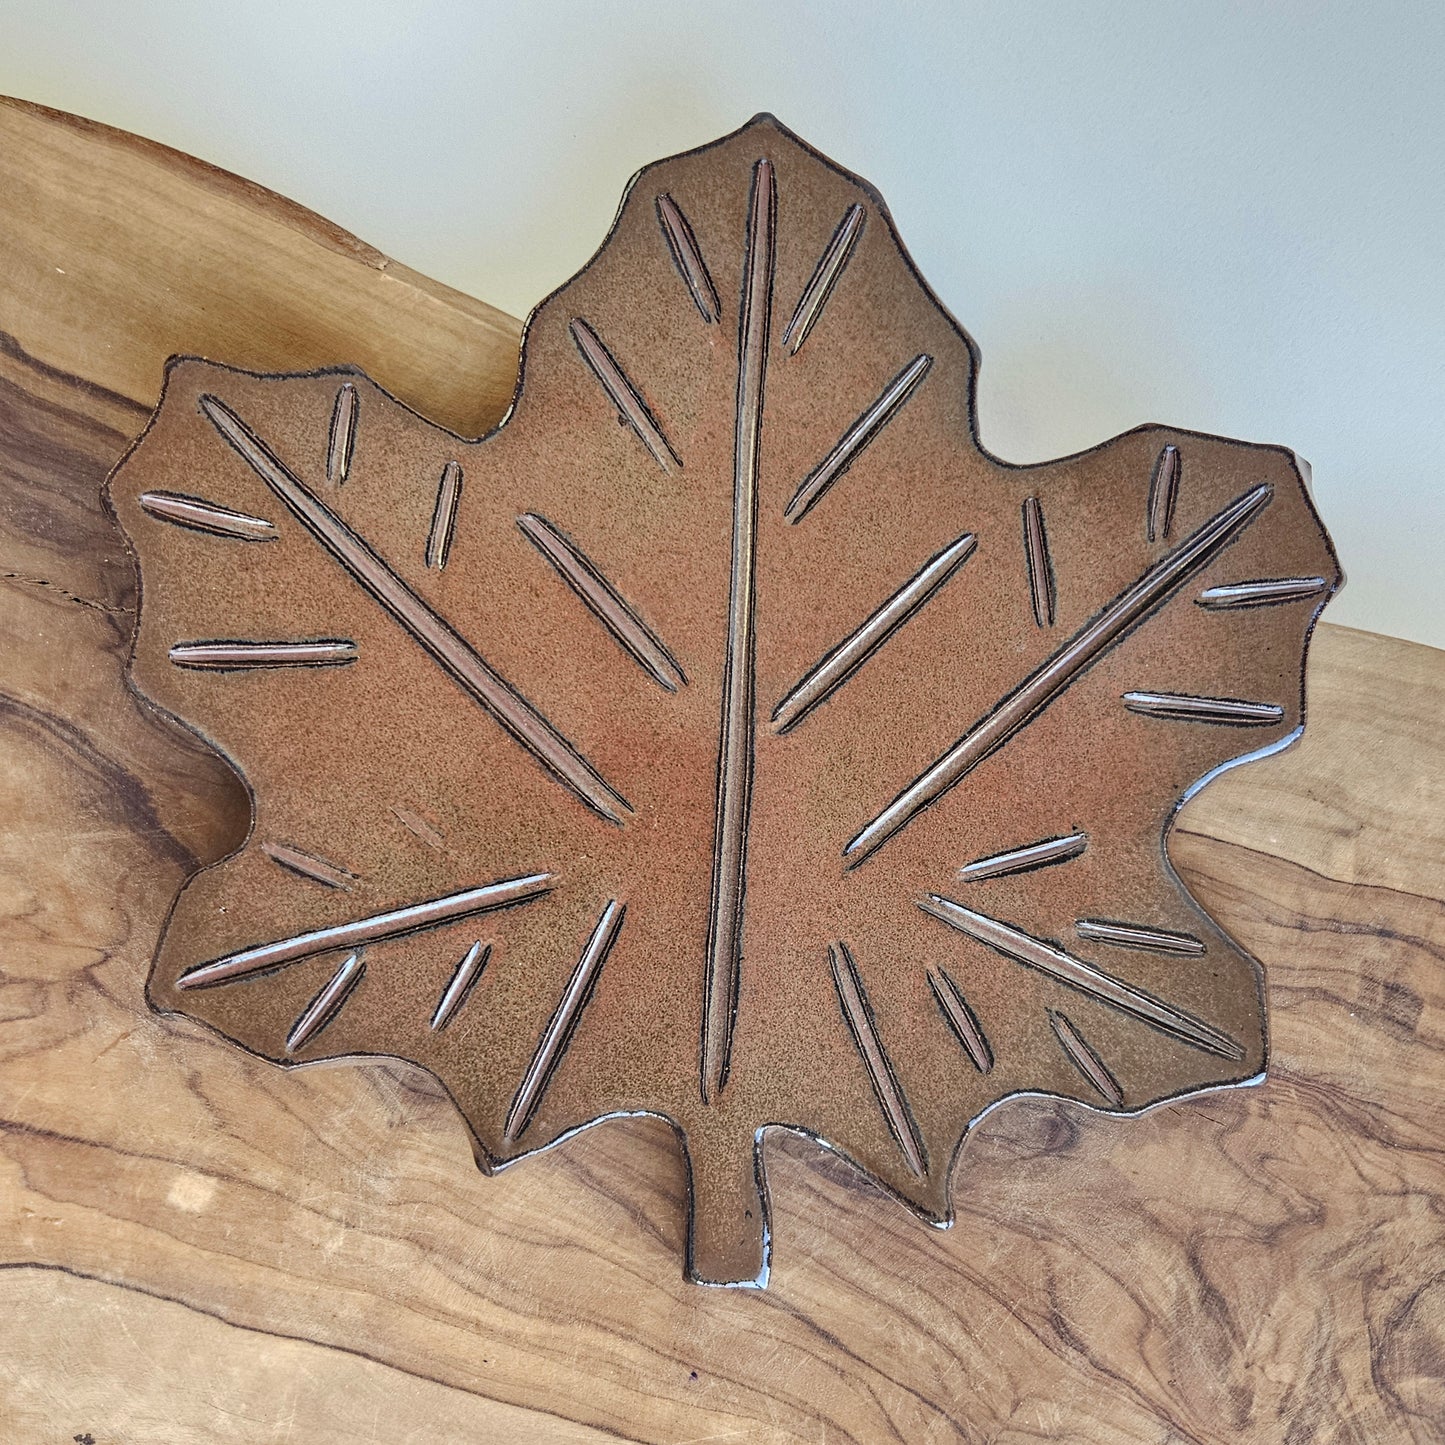 Maple Leaf Handmade Ceramic Spoon Rest, Rustic Nature Kitchen Decor Style for Countertop